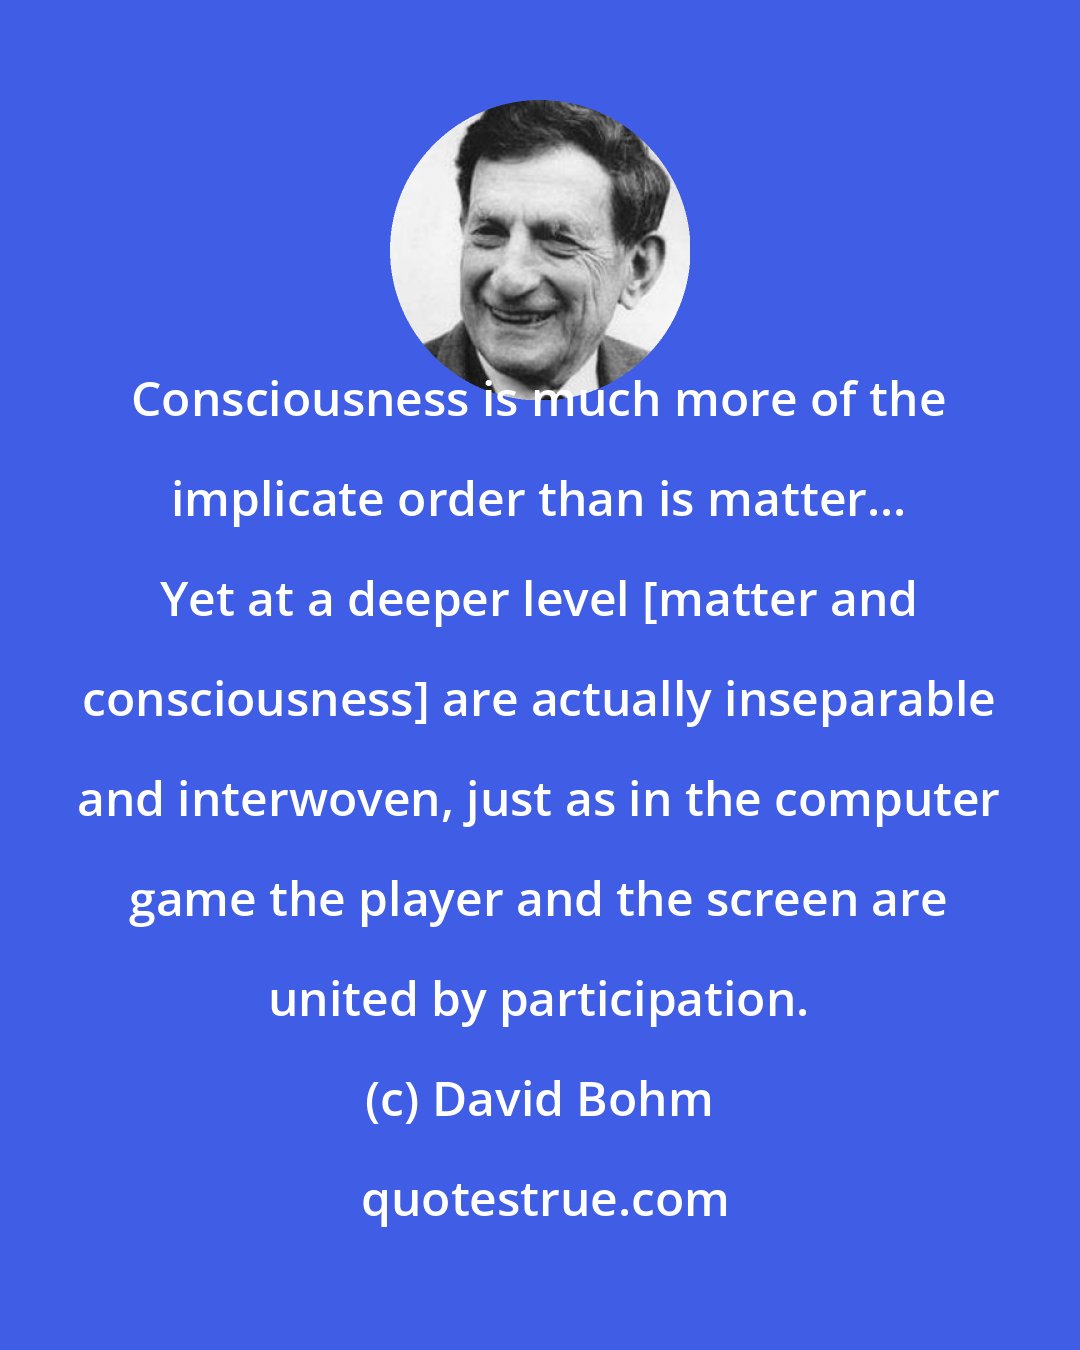 David Bohm: Consciousness is much more of the implicate order than is matter... Yet at a deeper level [matter and consciousness] are actually inseparable and interwoven, just as in the computer game the player and the screen are united by participation.